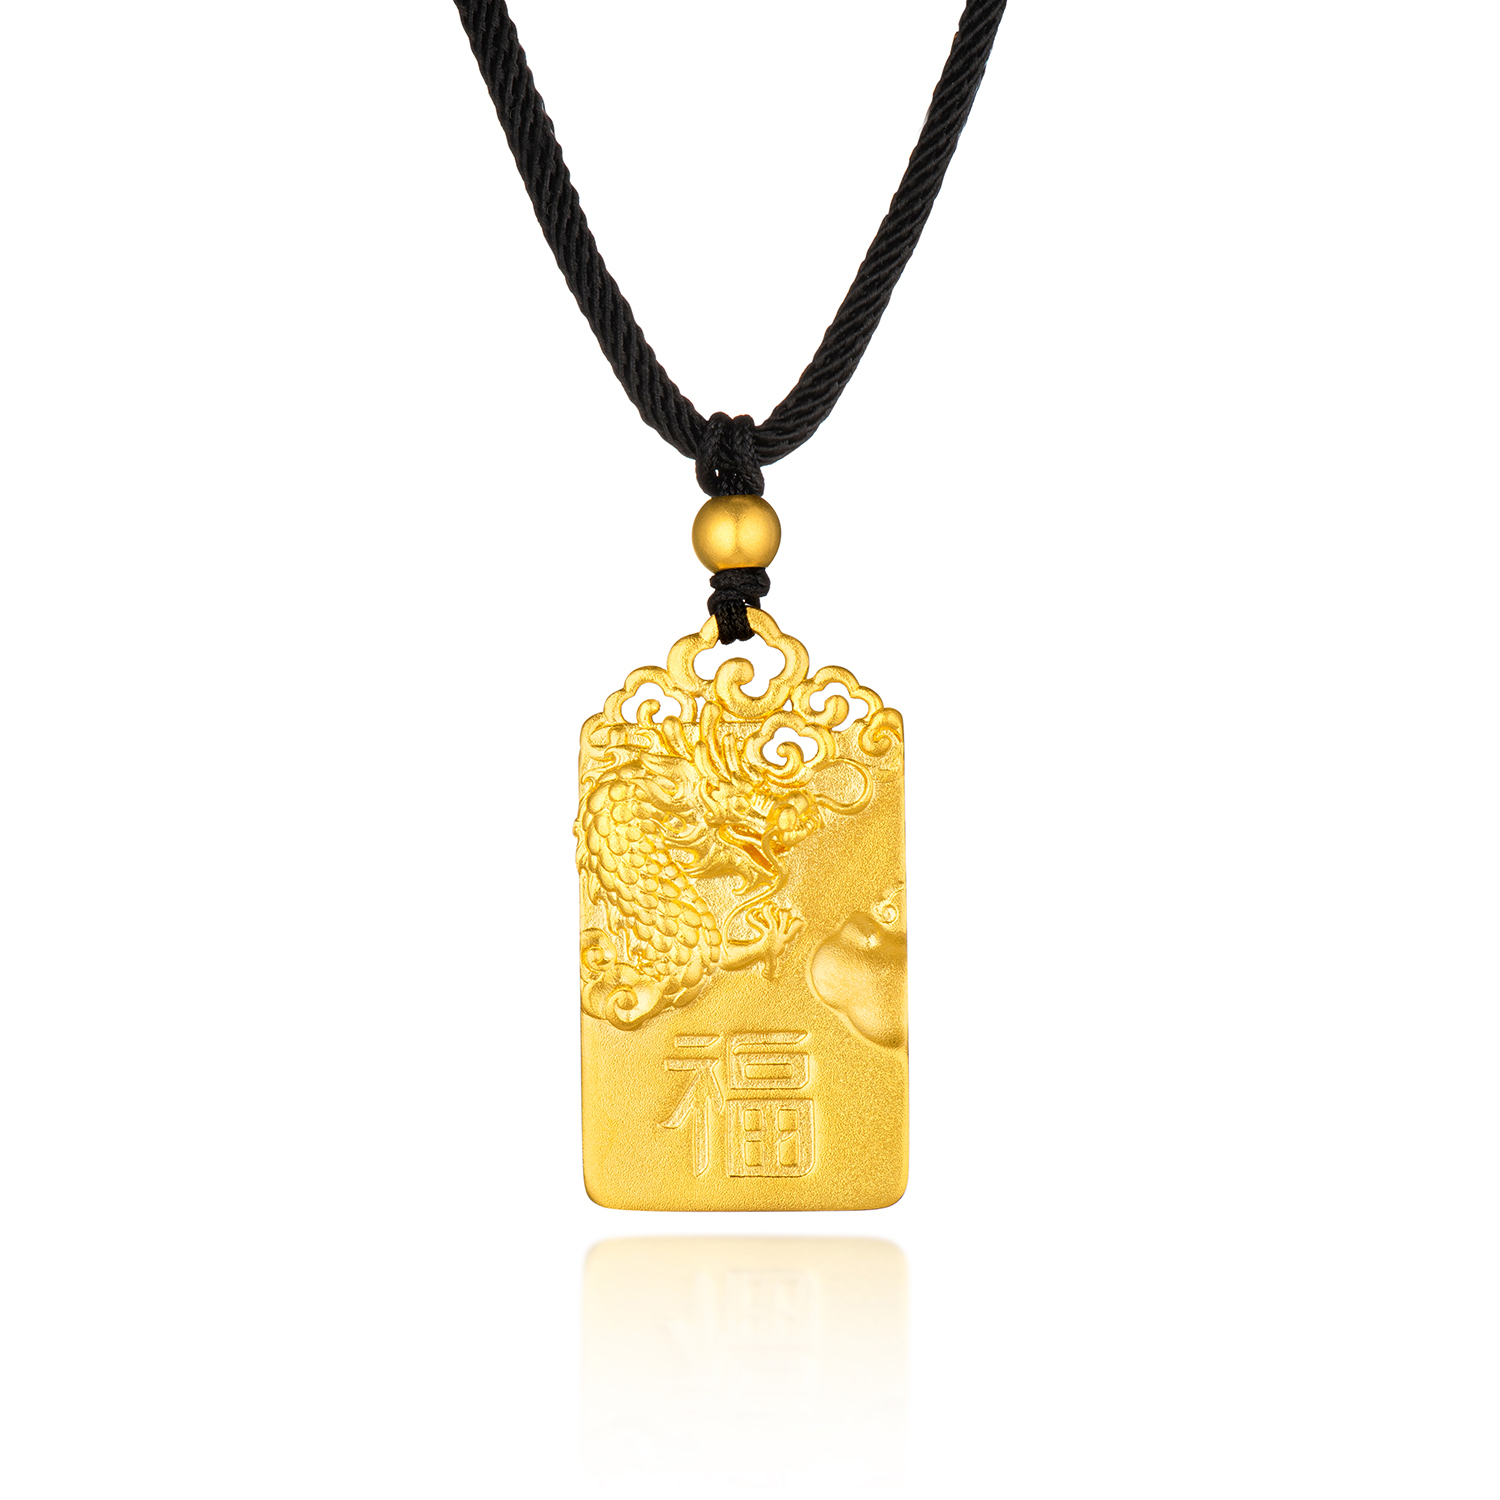 Heirloom Fortune Collection “Peace & Joy” Gold Necklace